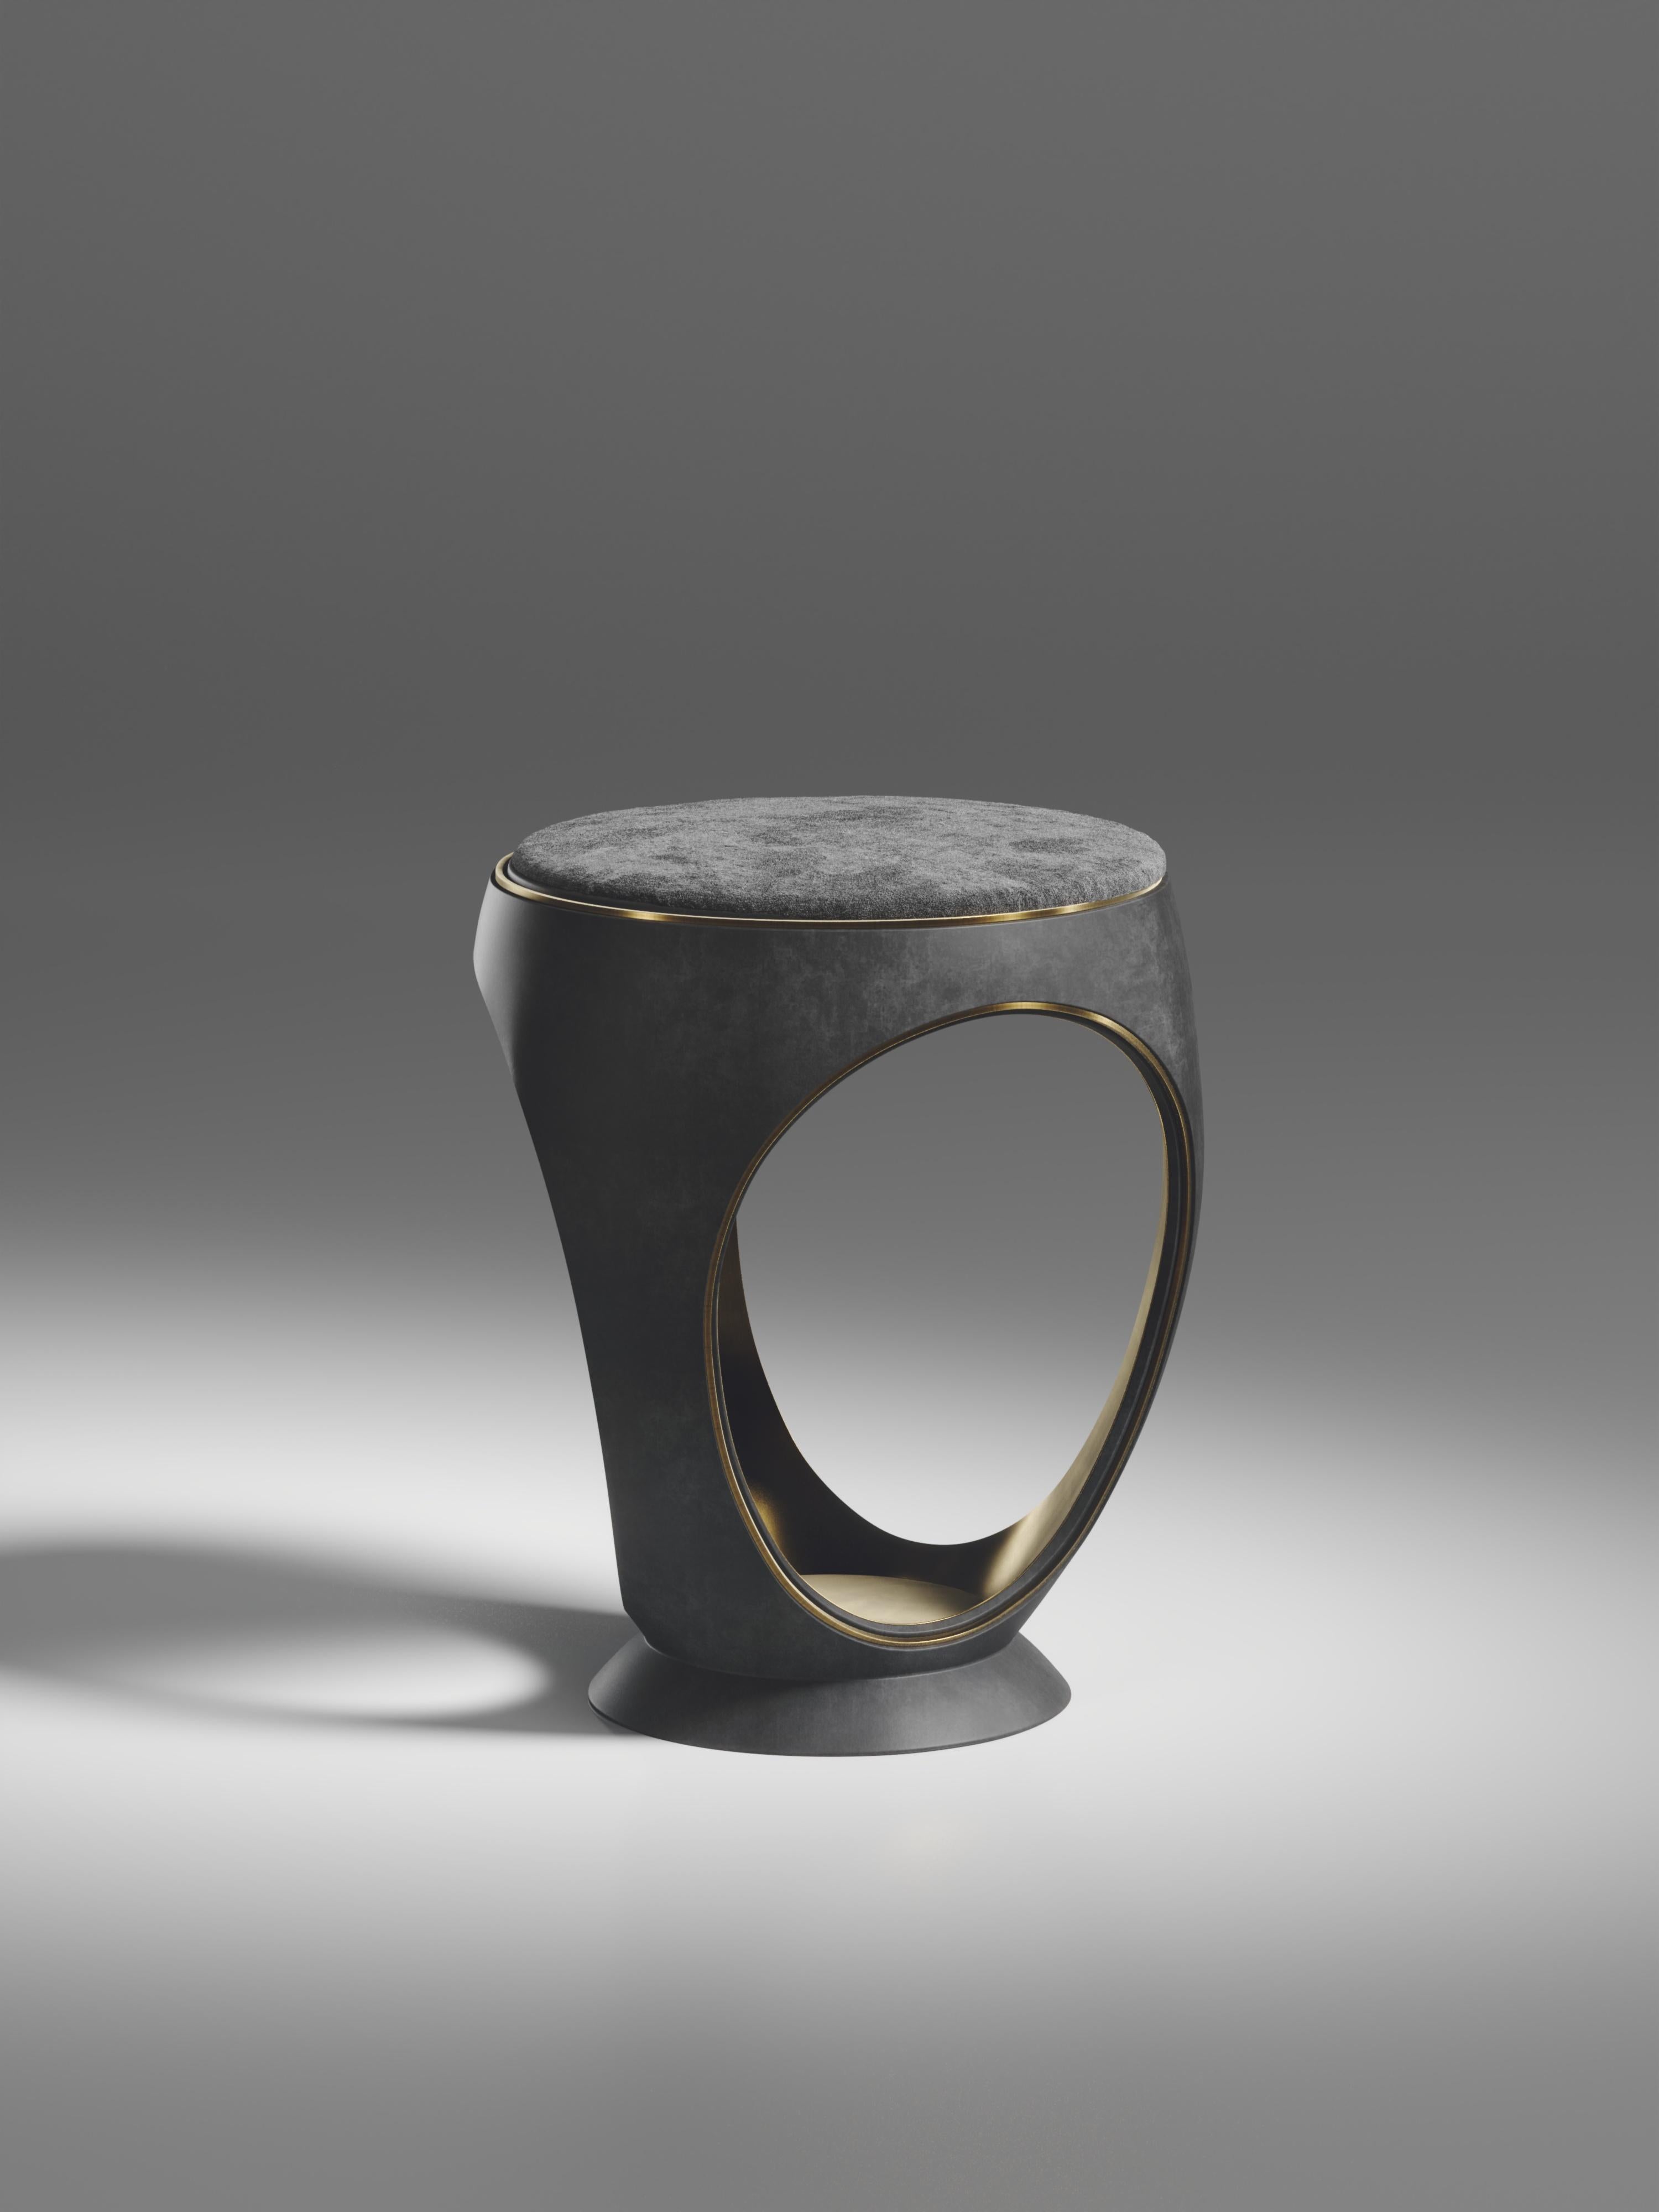 The ring stool in dark parchment is one of the most iconic pieces of the R&Y Augousti Collection. A Sculptural, jewel-like shape, this piece has been revamped with a discreet bronze-patina brass indentation detail on the exterior, as well as the